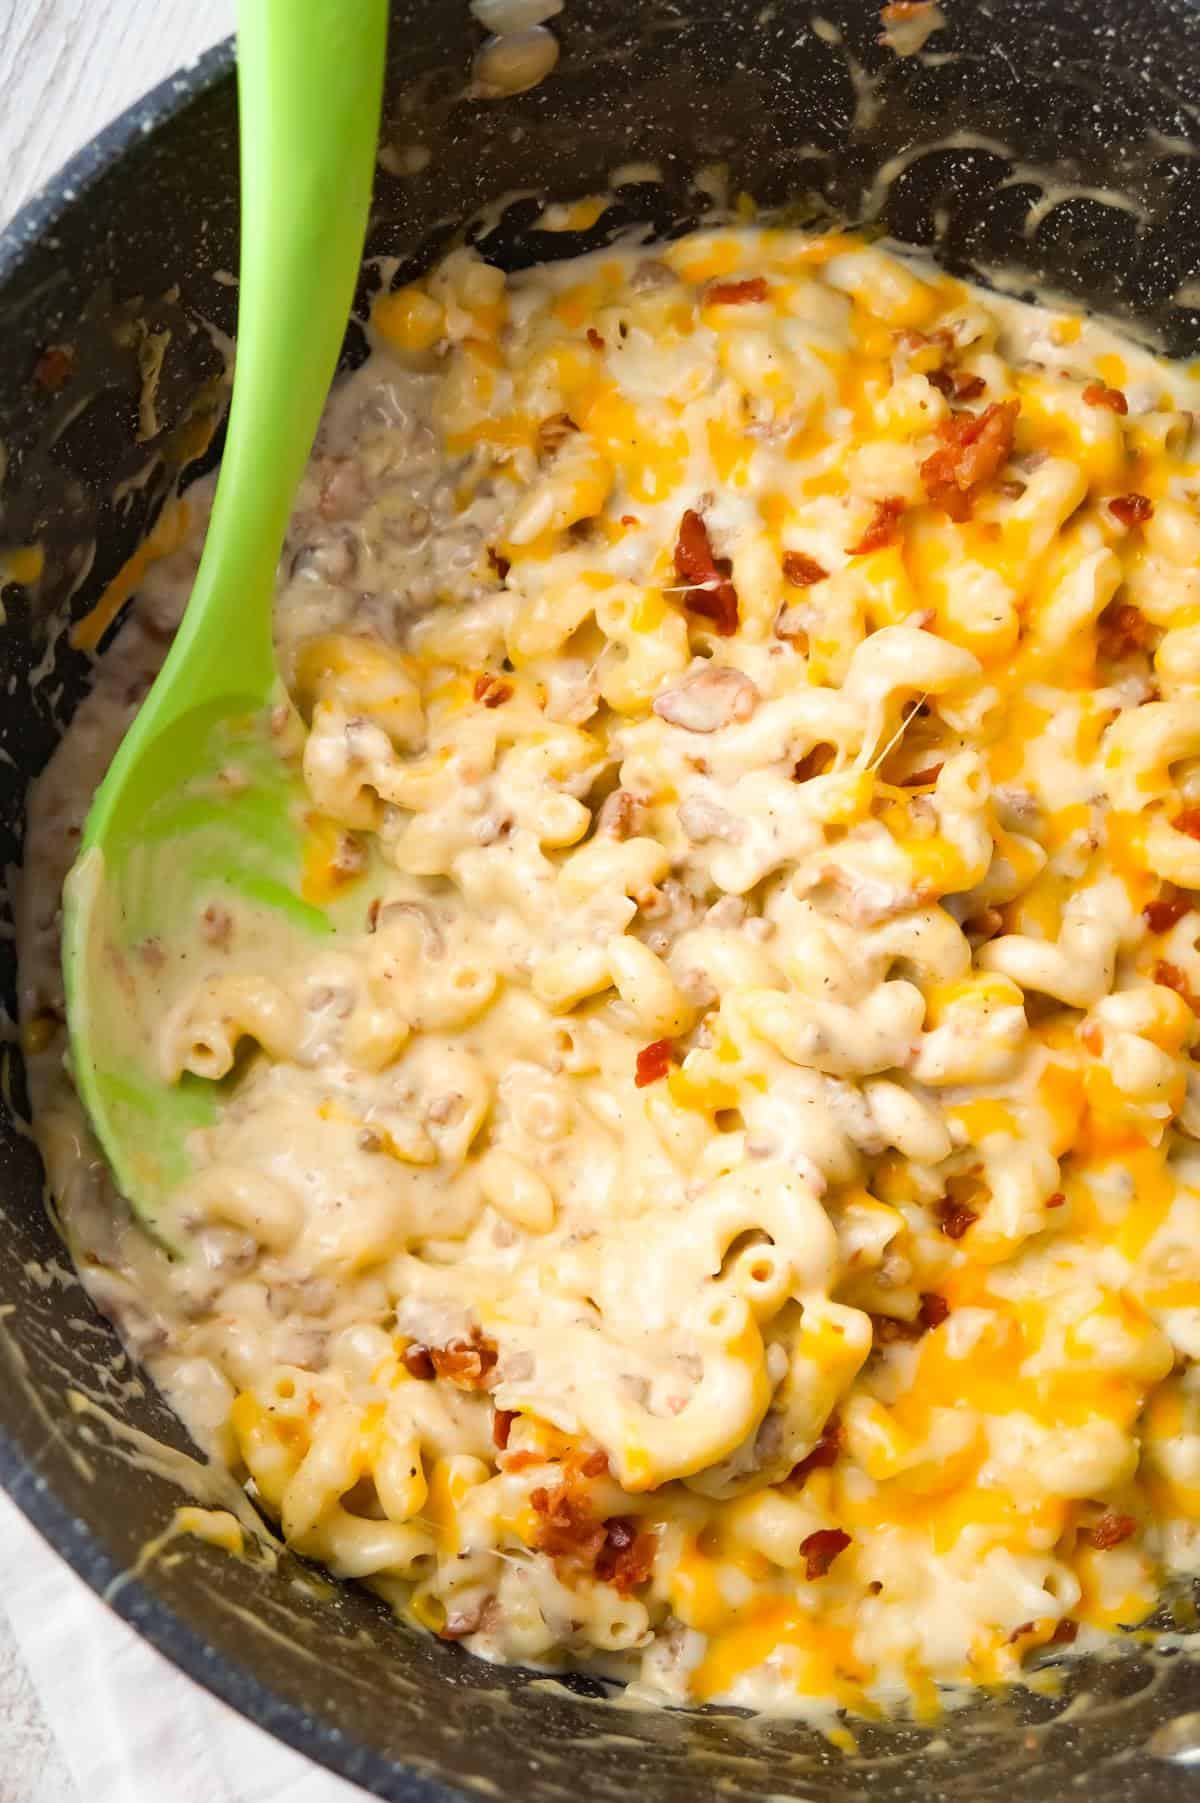 One Pot Bacon Cheeseburger Pasta is a creamy pasta recipe loaded with ground beef, crumbled bacon, mozzarella and cheddar cheese.